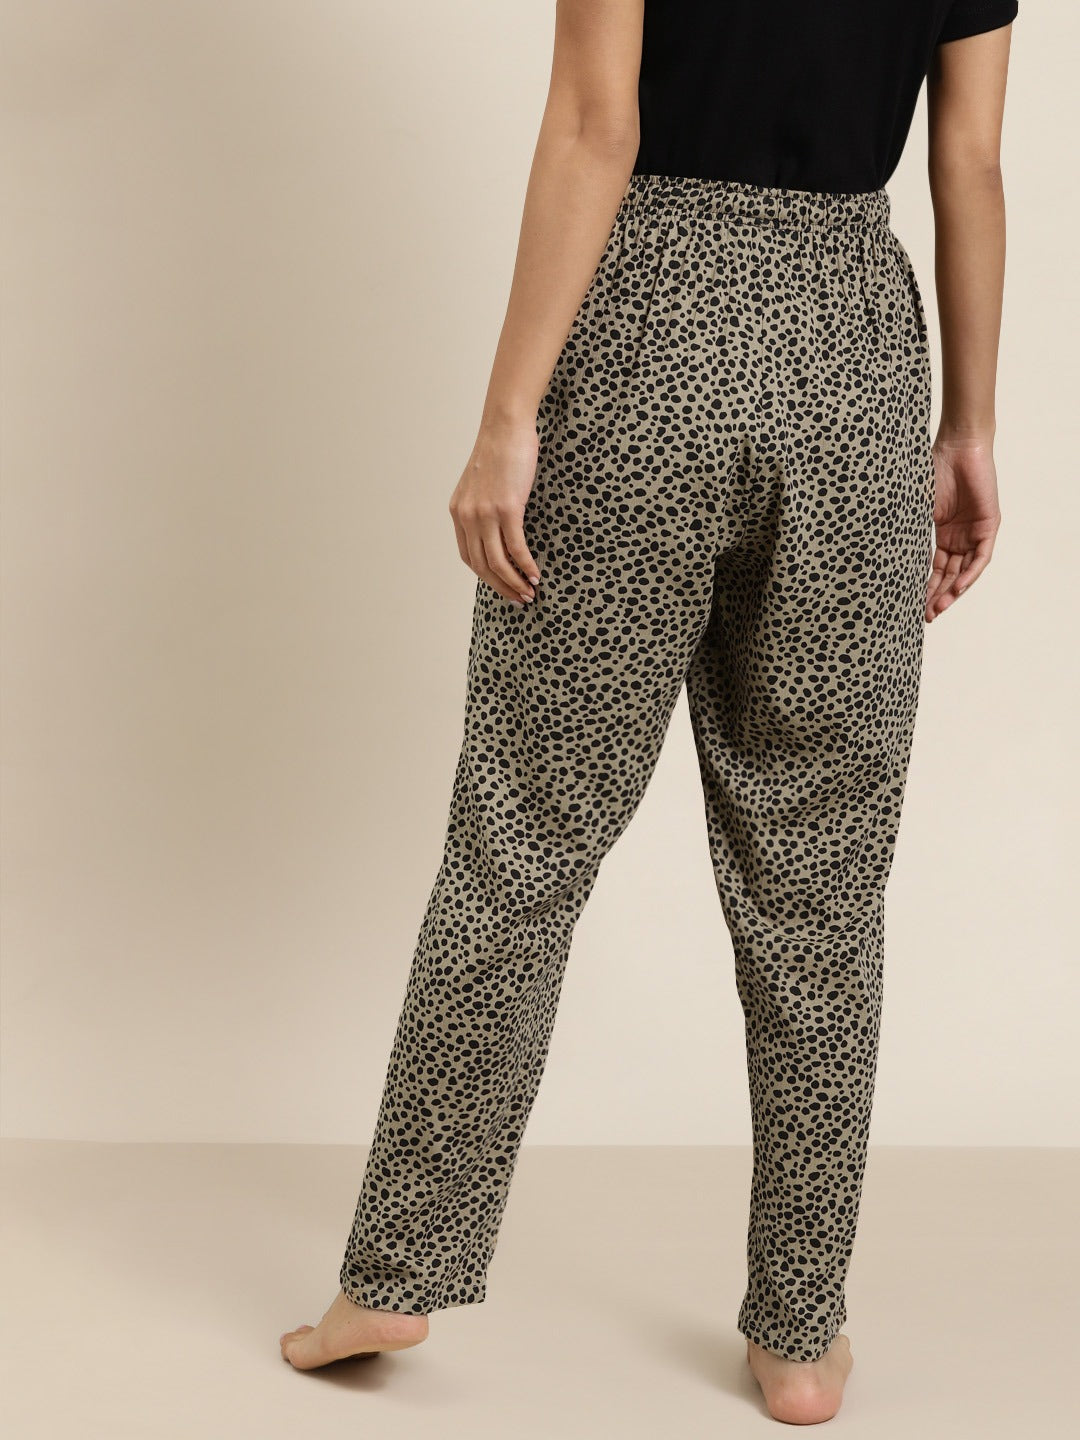 Women Beige-Black Prints Viscose Rayon Relaxed Fit Casual Lounge Pant